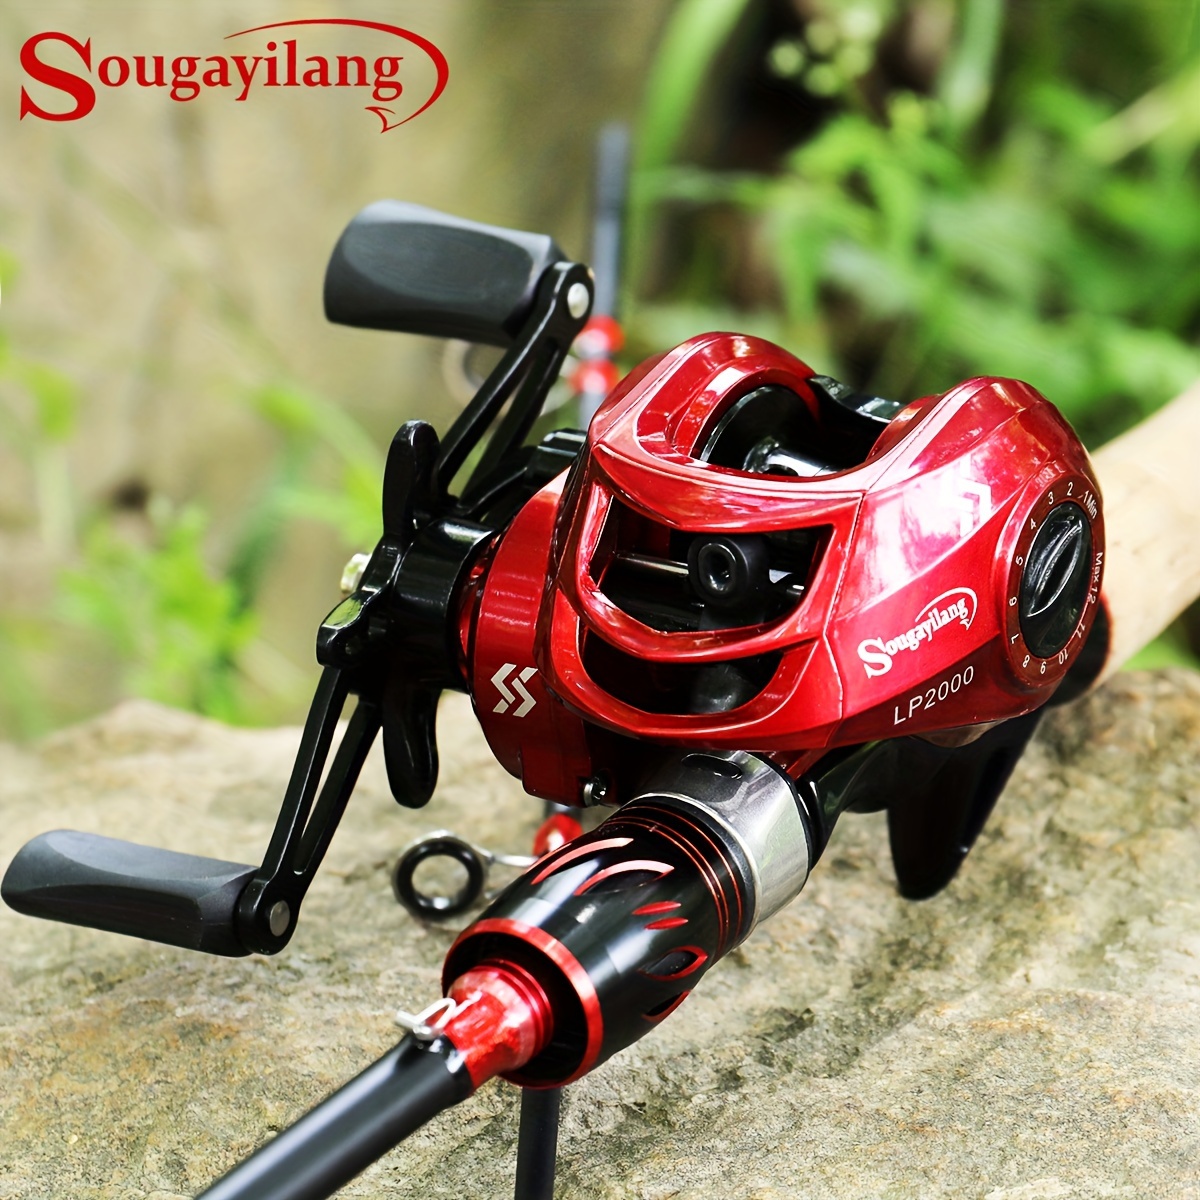 

Sougayilang 1pc Smooth Baitcasting Reel, 7.2:1 Gear Ratio, Magnetic Brake System, Fishing Tackle For Novices